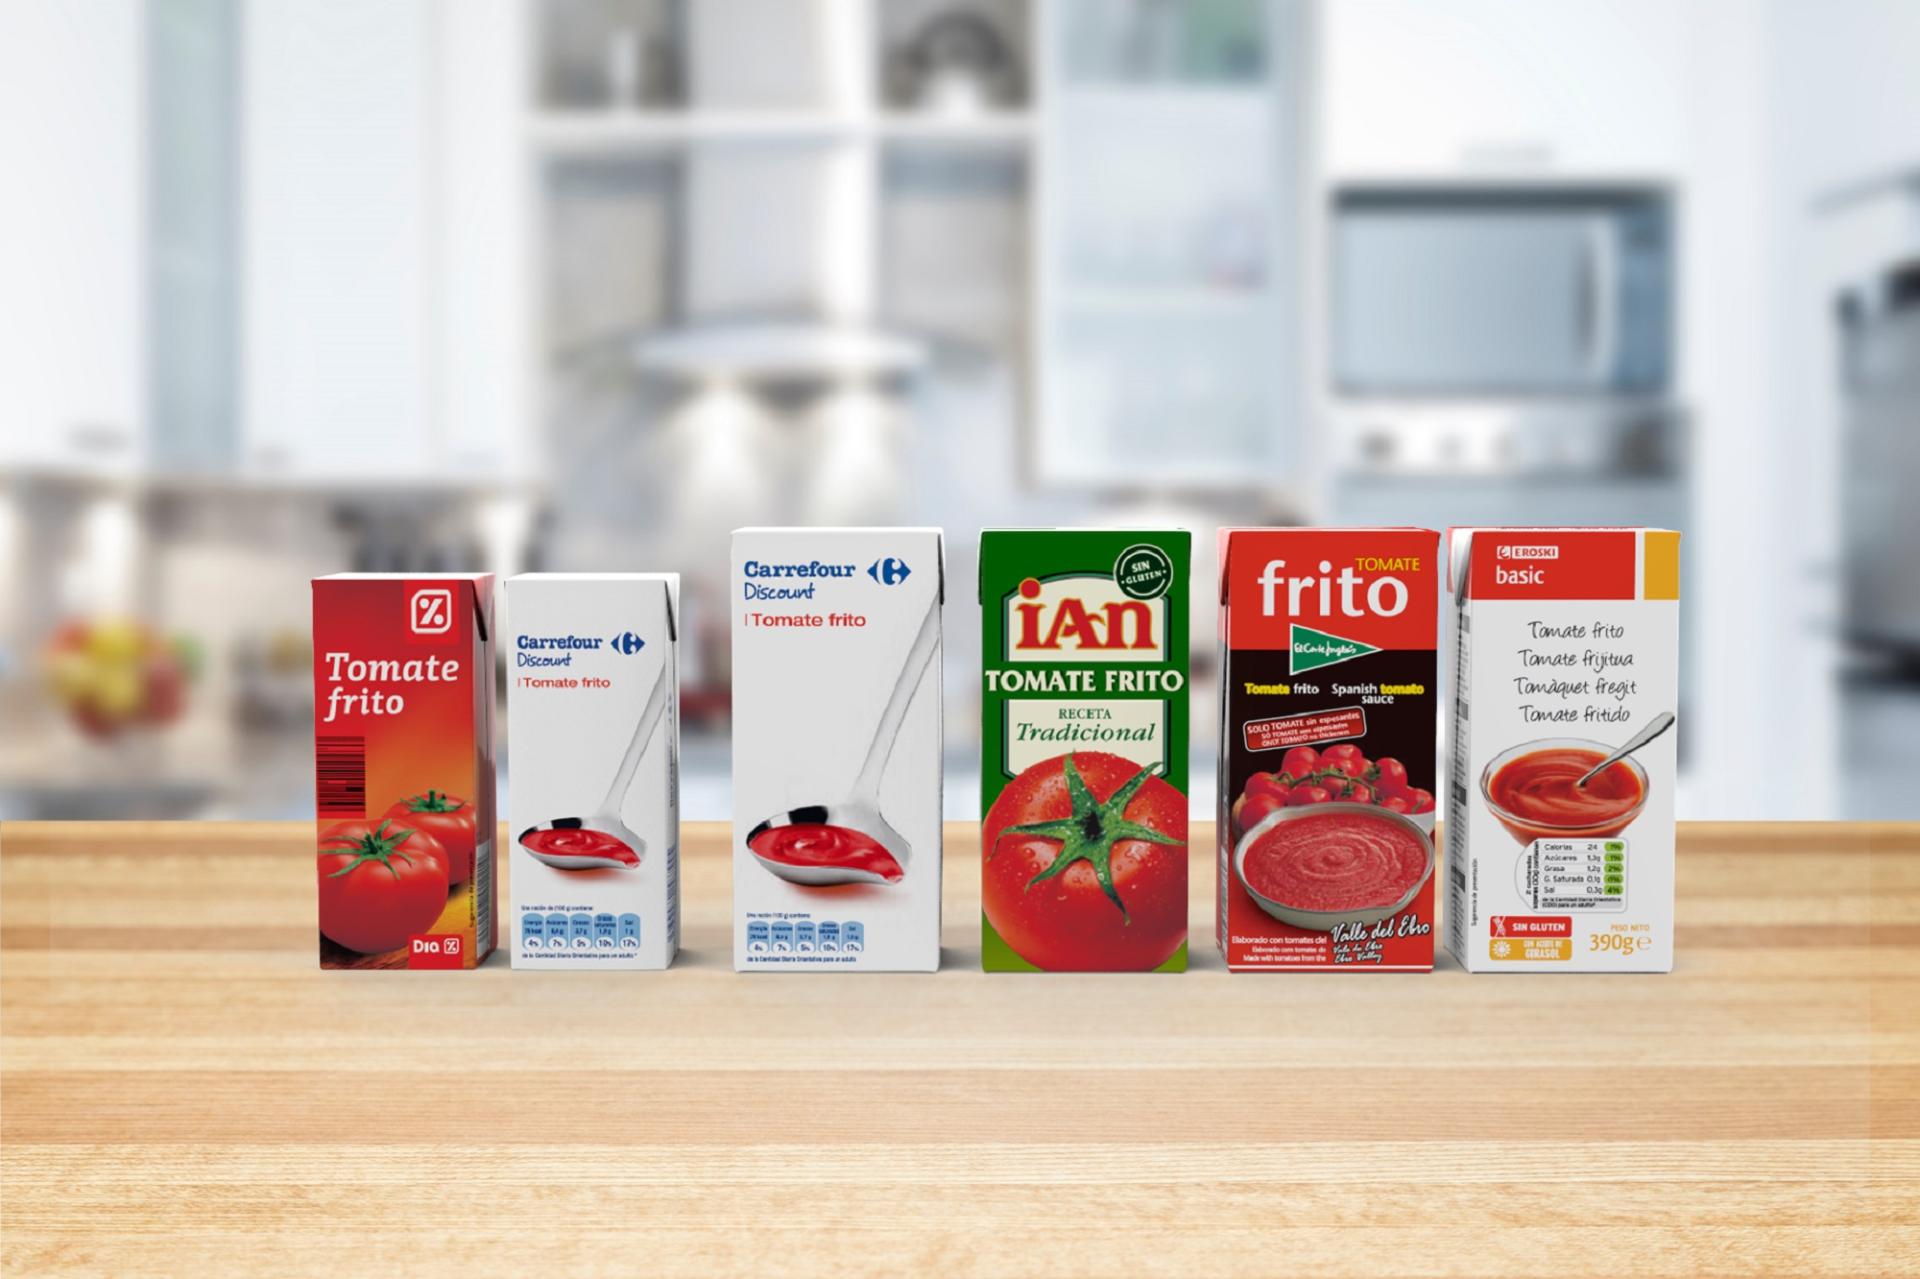 IPI fillers can pack tomato passata and tomate frito in aseptic carton bricks